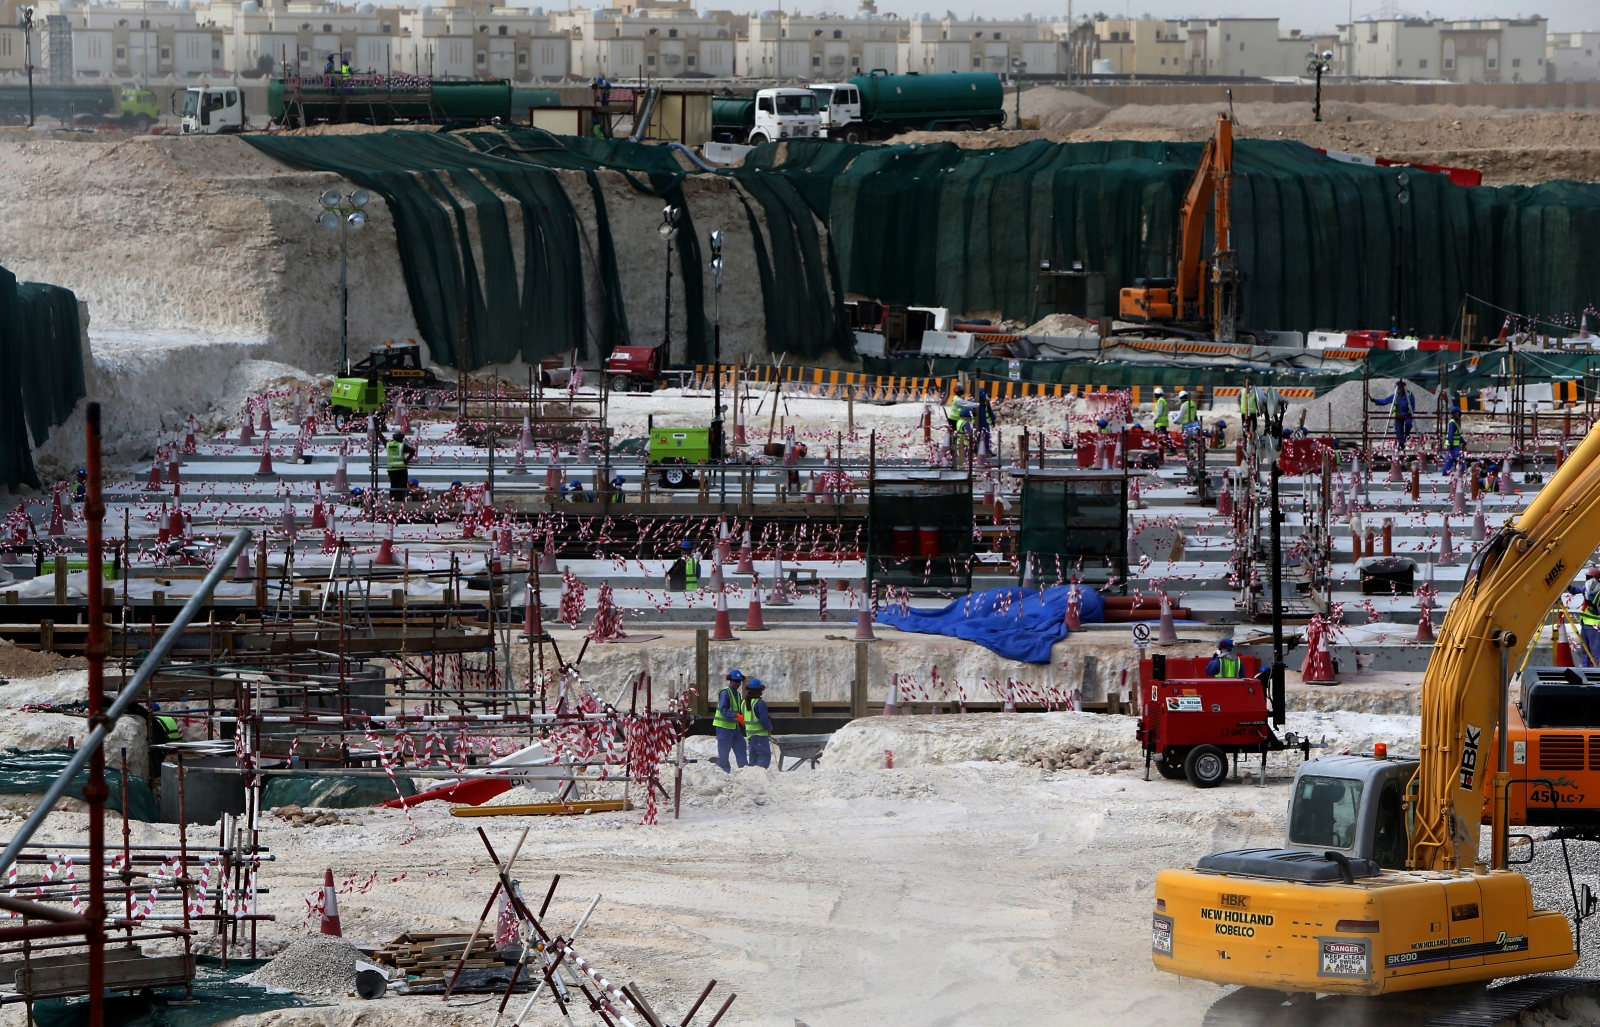 Fifa scandal: Qatar says no migrant workers died in World Cup 2022